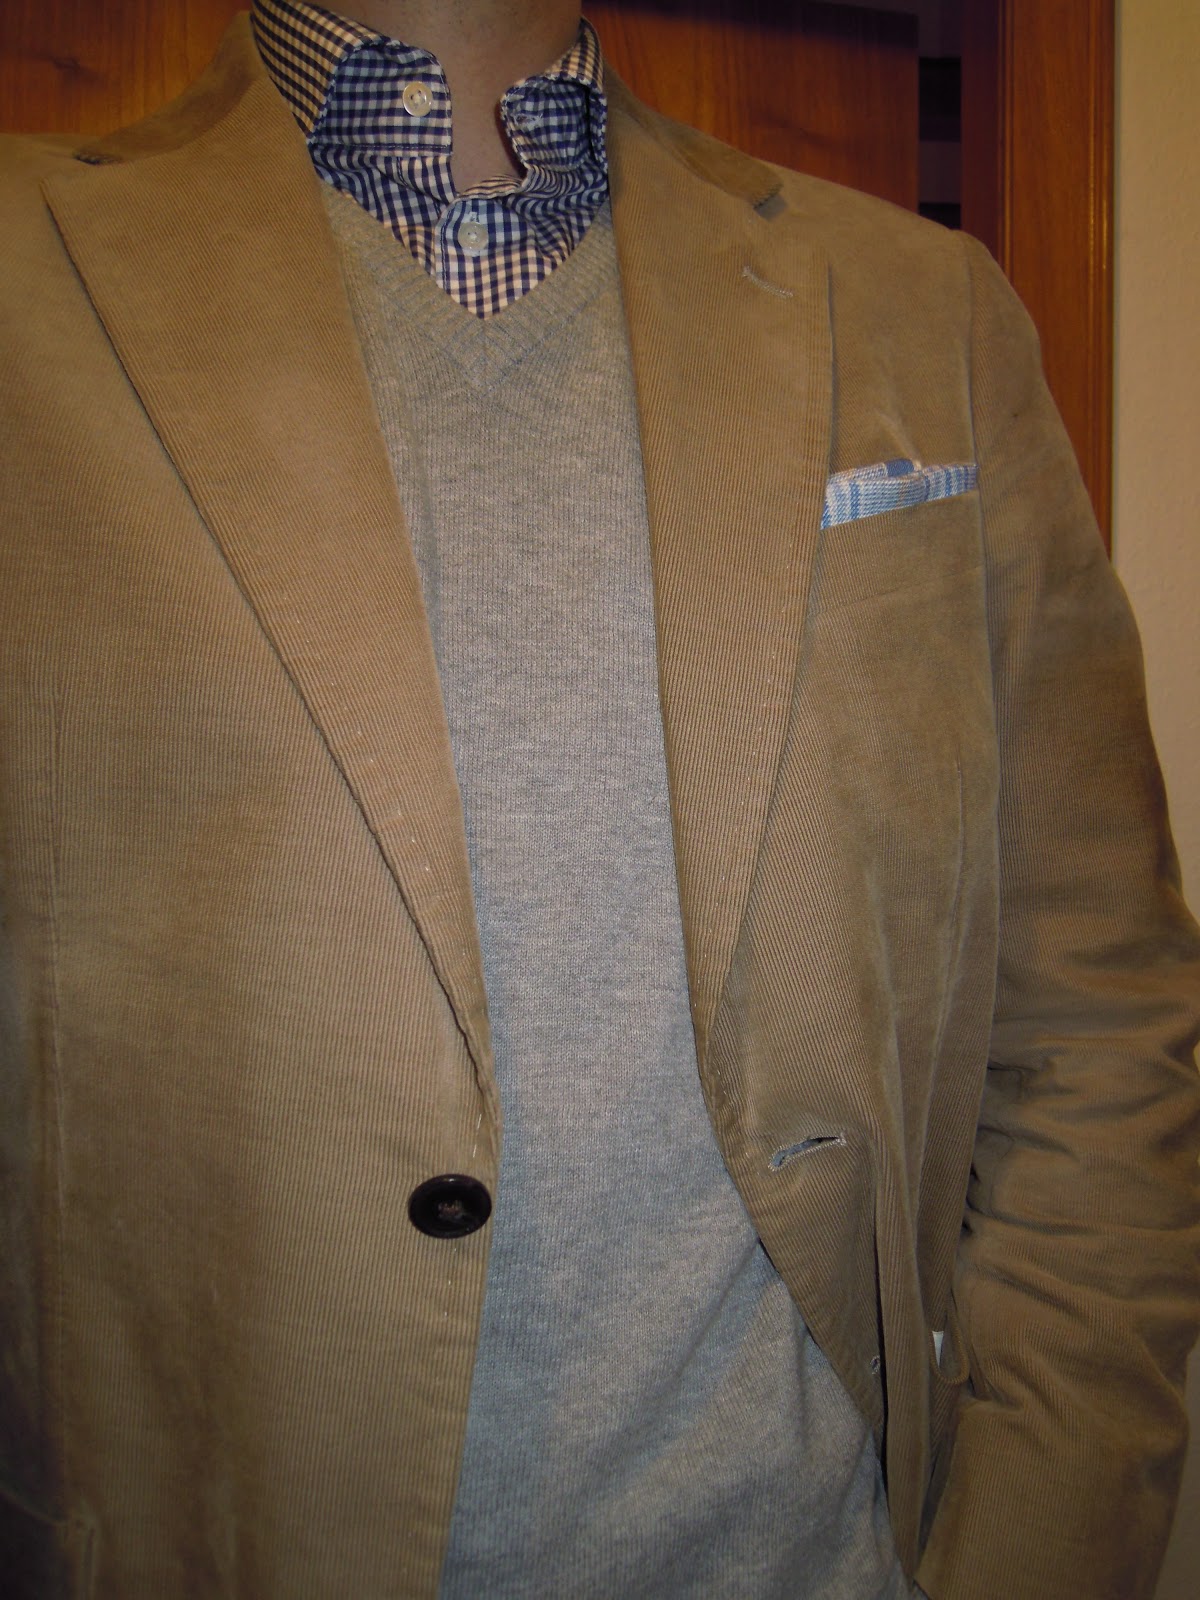 Inner City Style: Soft corduroy jacket and chinos.